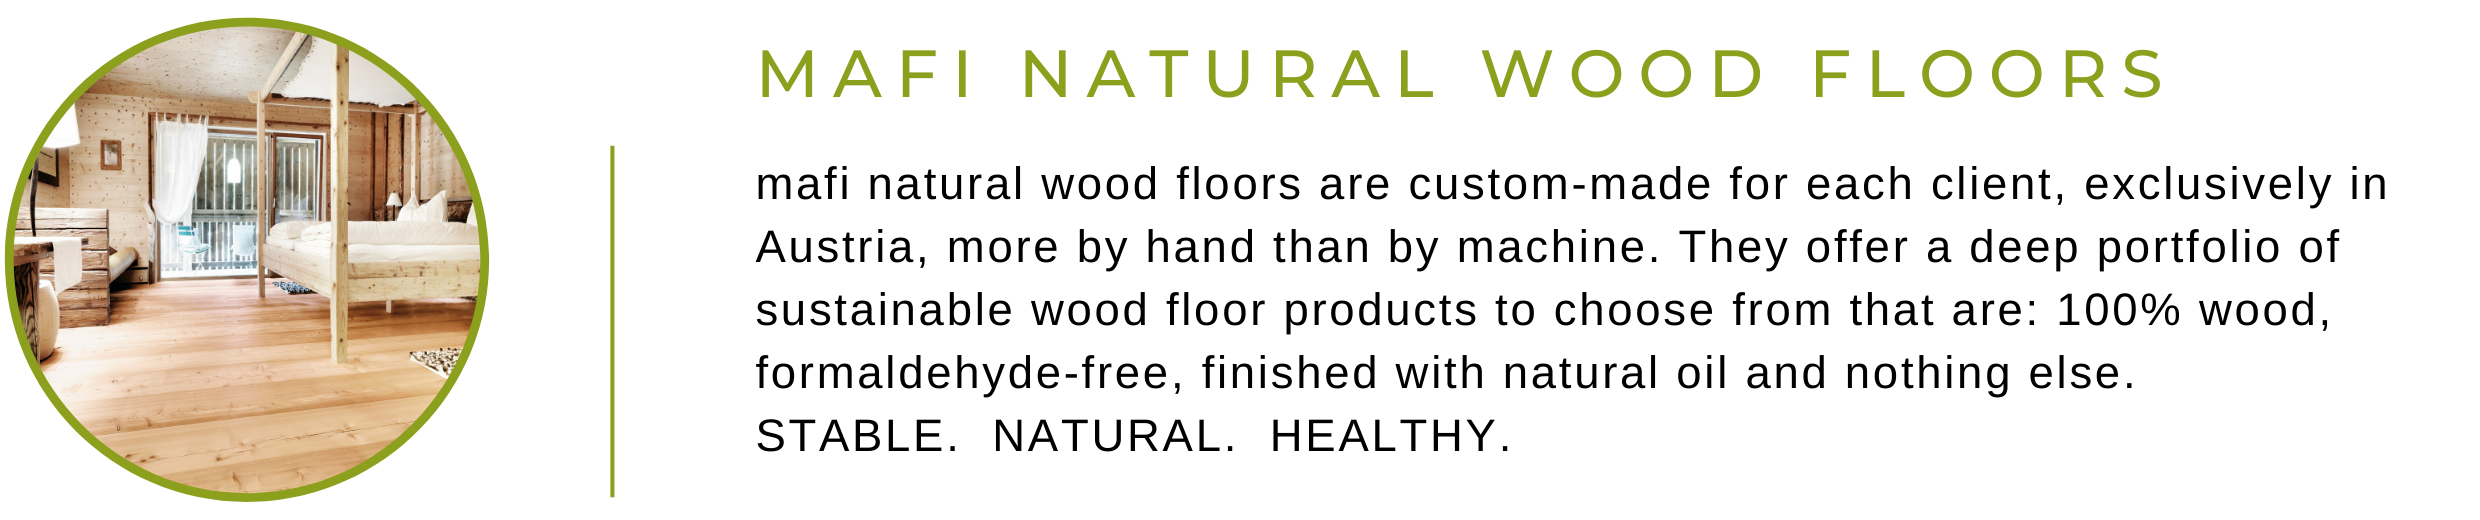 Mafi Natural Wood Floors are custom-made for each client, exclusively in Austria, more by hand than by machine. They offer a deep portfolio of sustainable wood floor products to choose from that are: 100% wood, formaldehyde-free, finished with natural oil and nothing else. STABLE.  NATURAL.  HEALTHY.